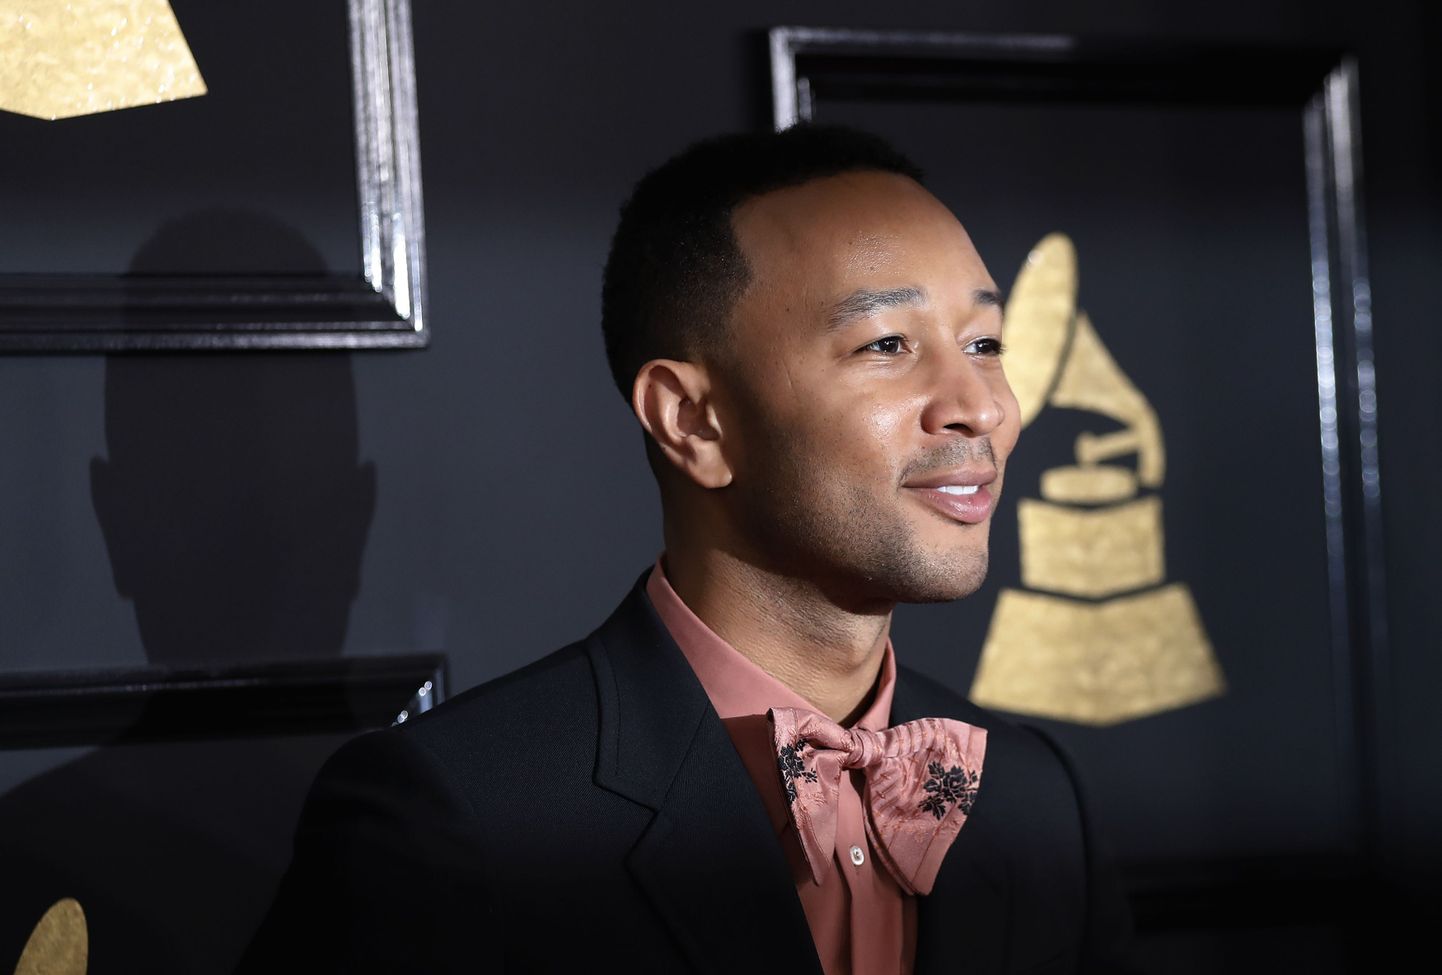 Musician John Legend arrives at the 59th Annual Grammy Awards in Los Angeles, California, U.S. , February 12, 2017. REUTERS/Mario Anzuoni